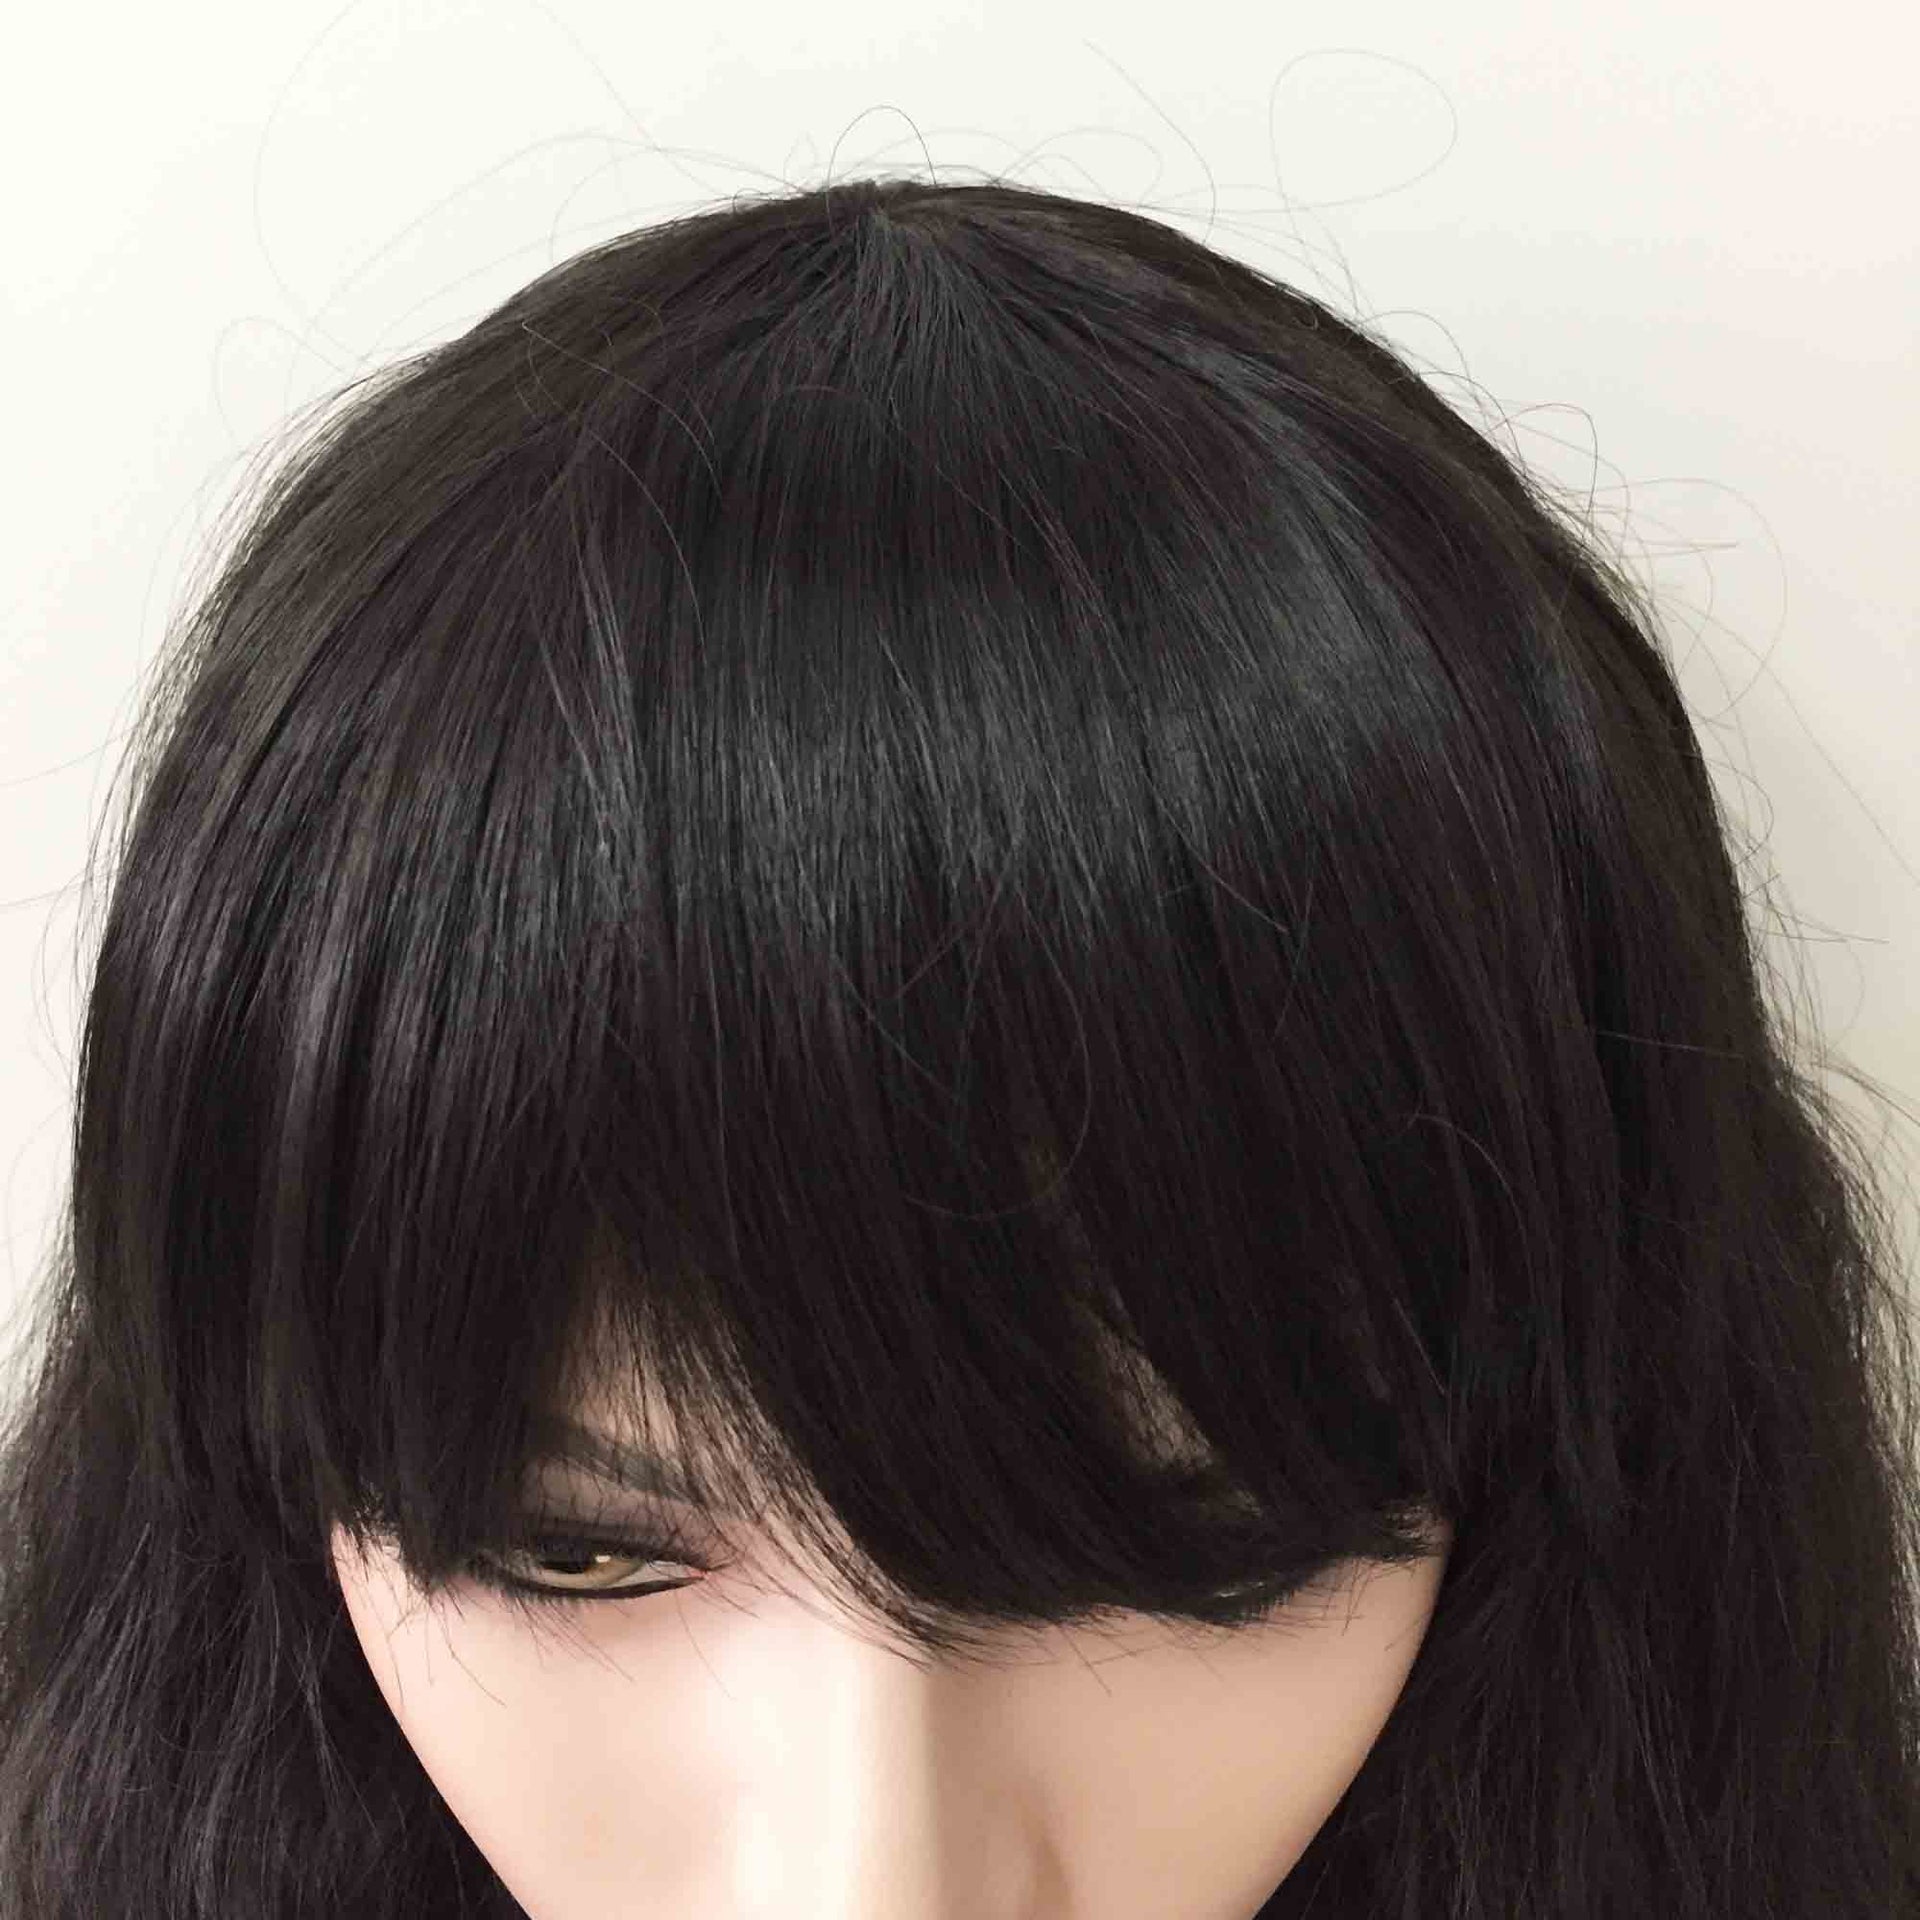 nevermindyrhead Women Black Long Curly Frizzy Fringe Bangs Thick Wig